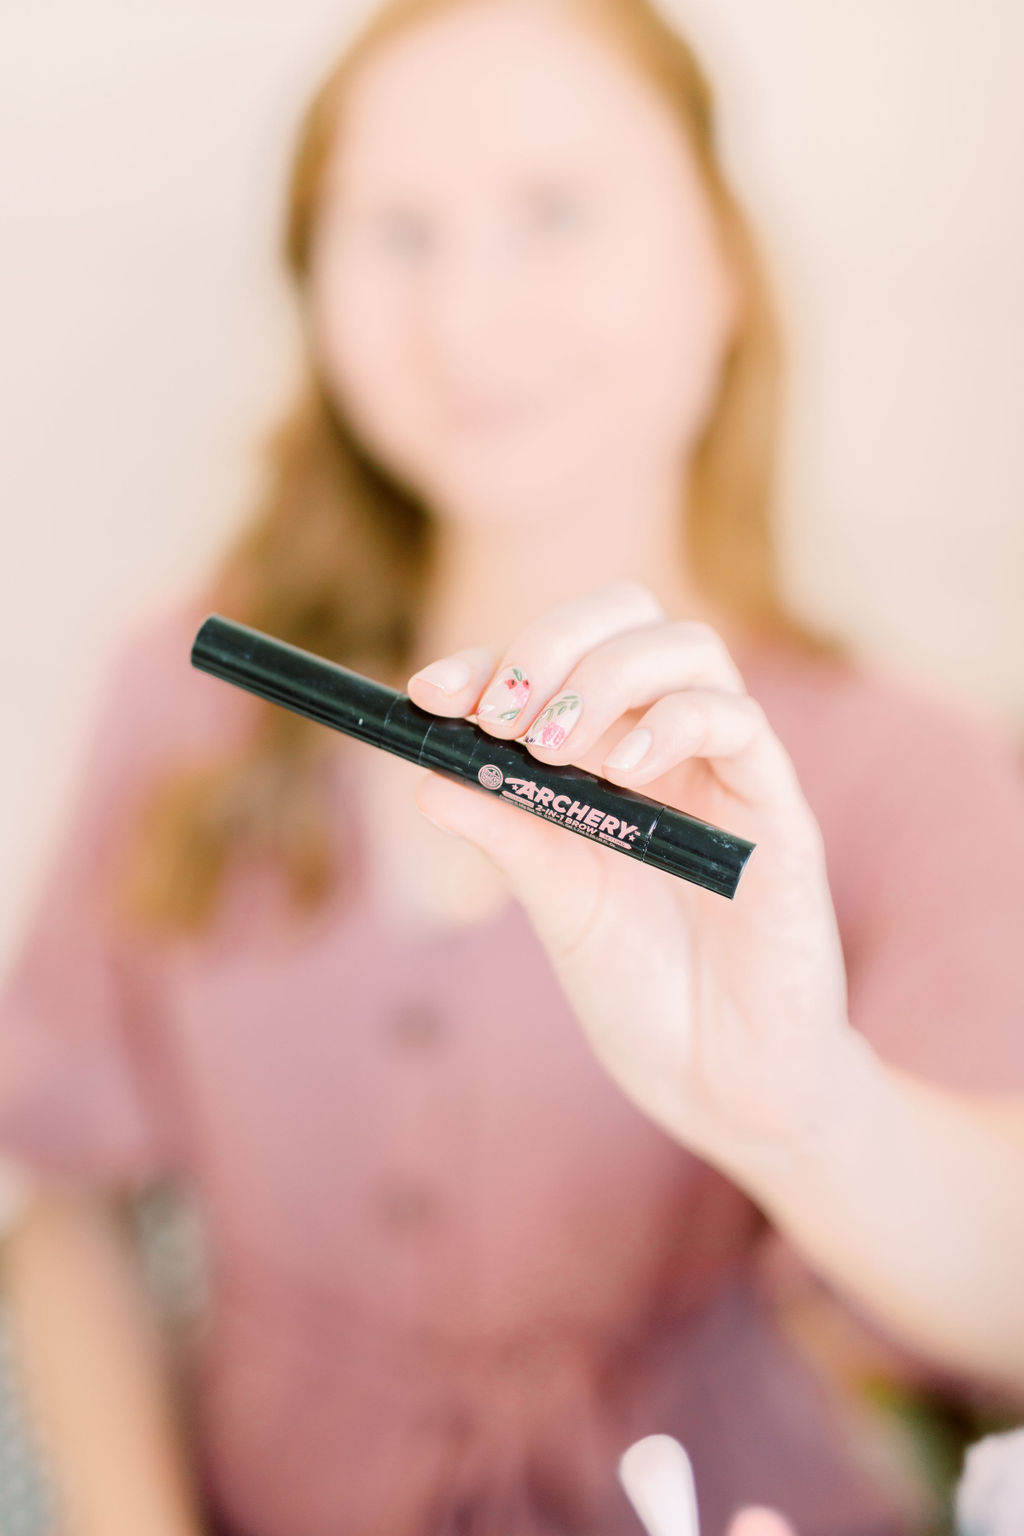 blogger amanda burrows from the fashion blog affordable by amanda is using the $14.00 Soap & Glory Archery 2-in-1 Crayon Gel on her eyebrows